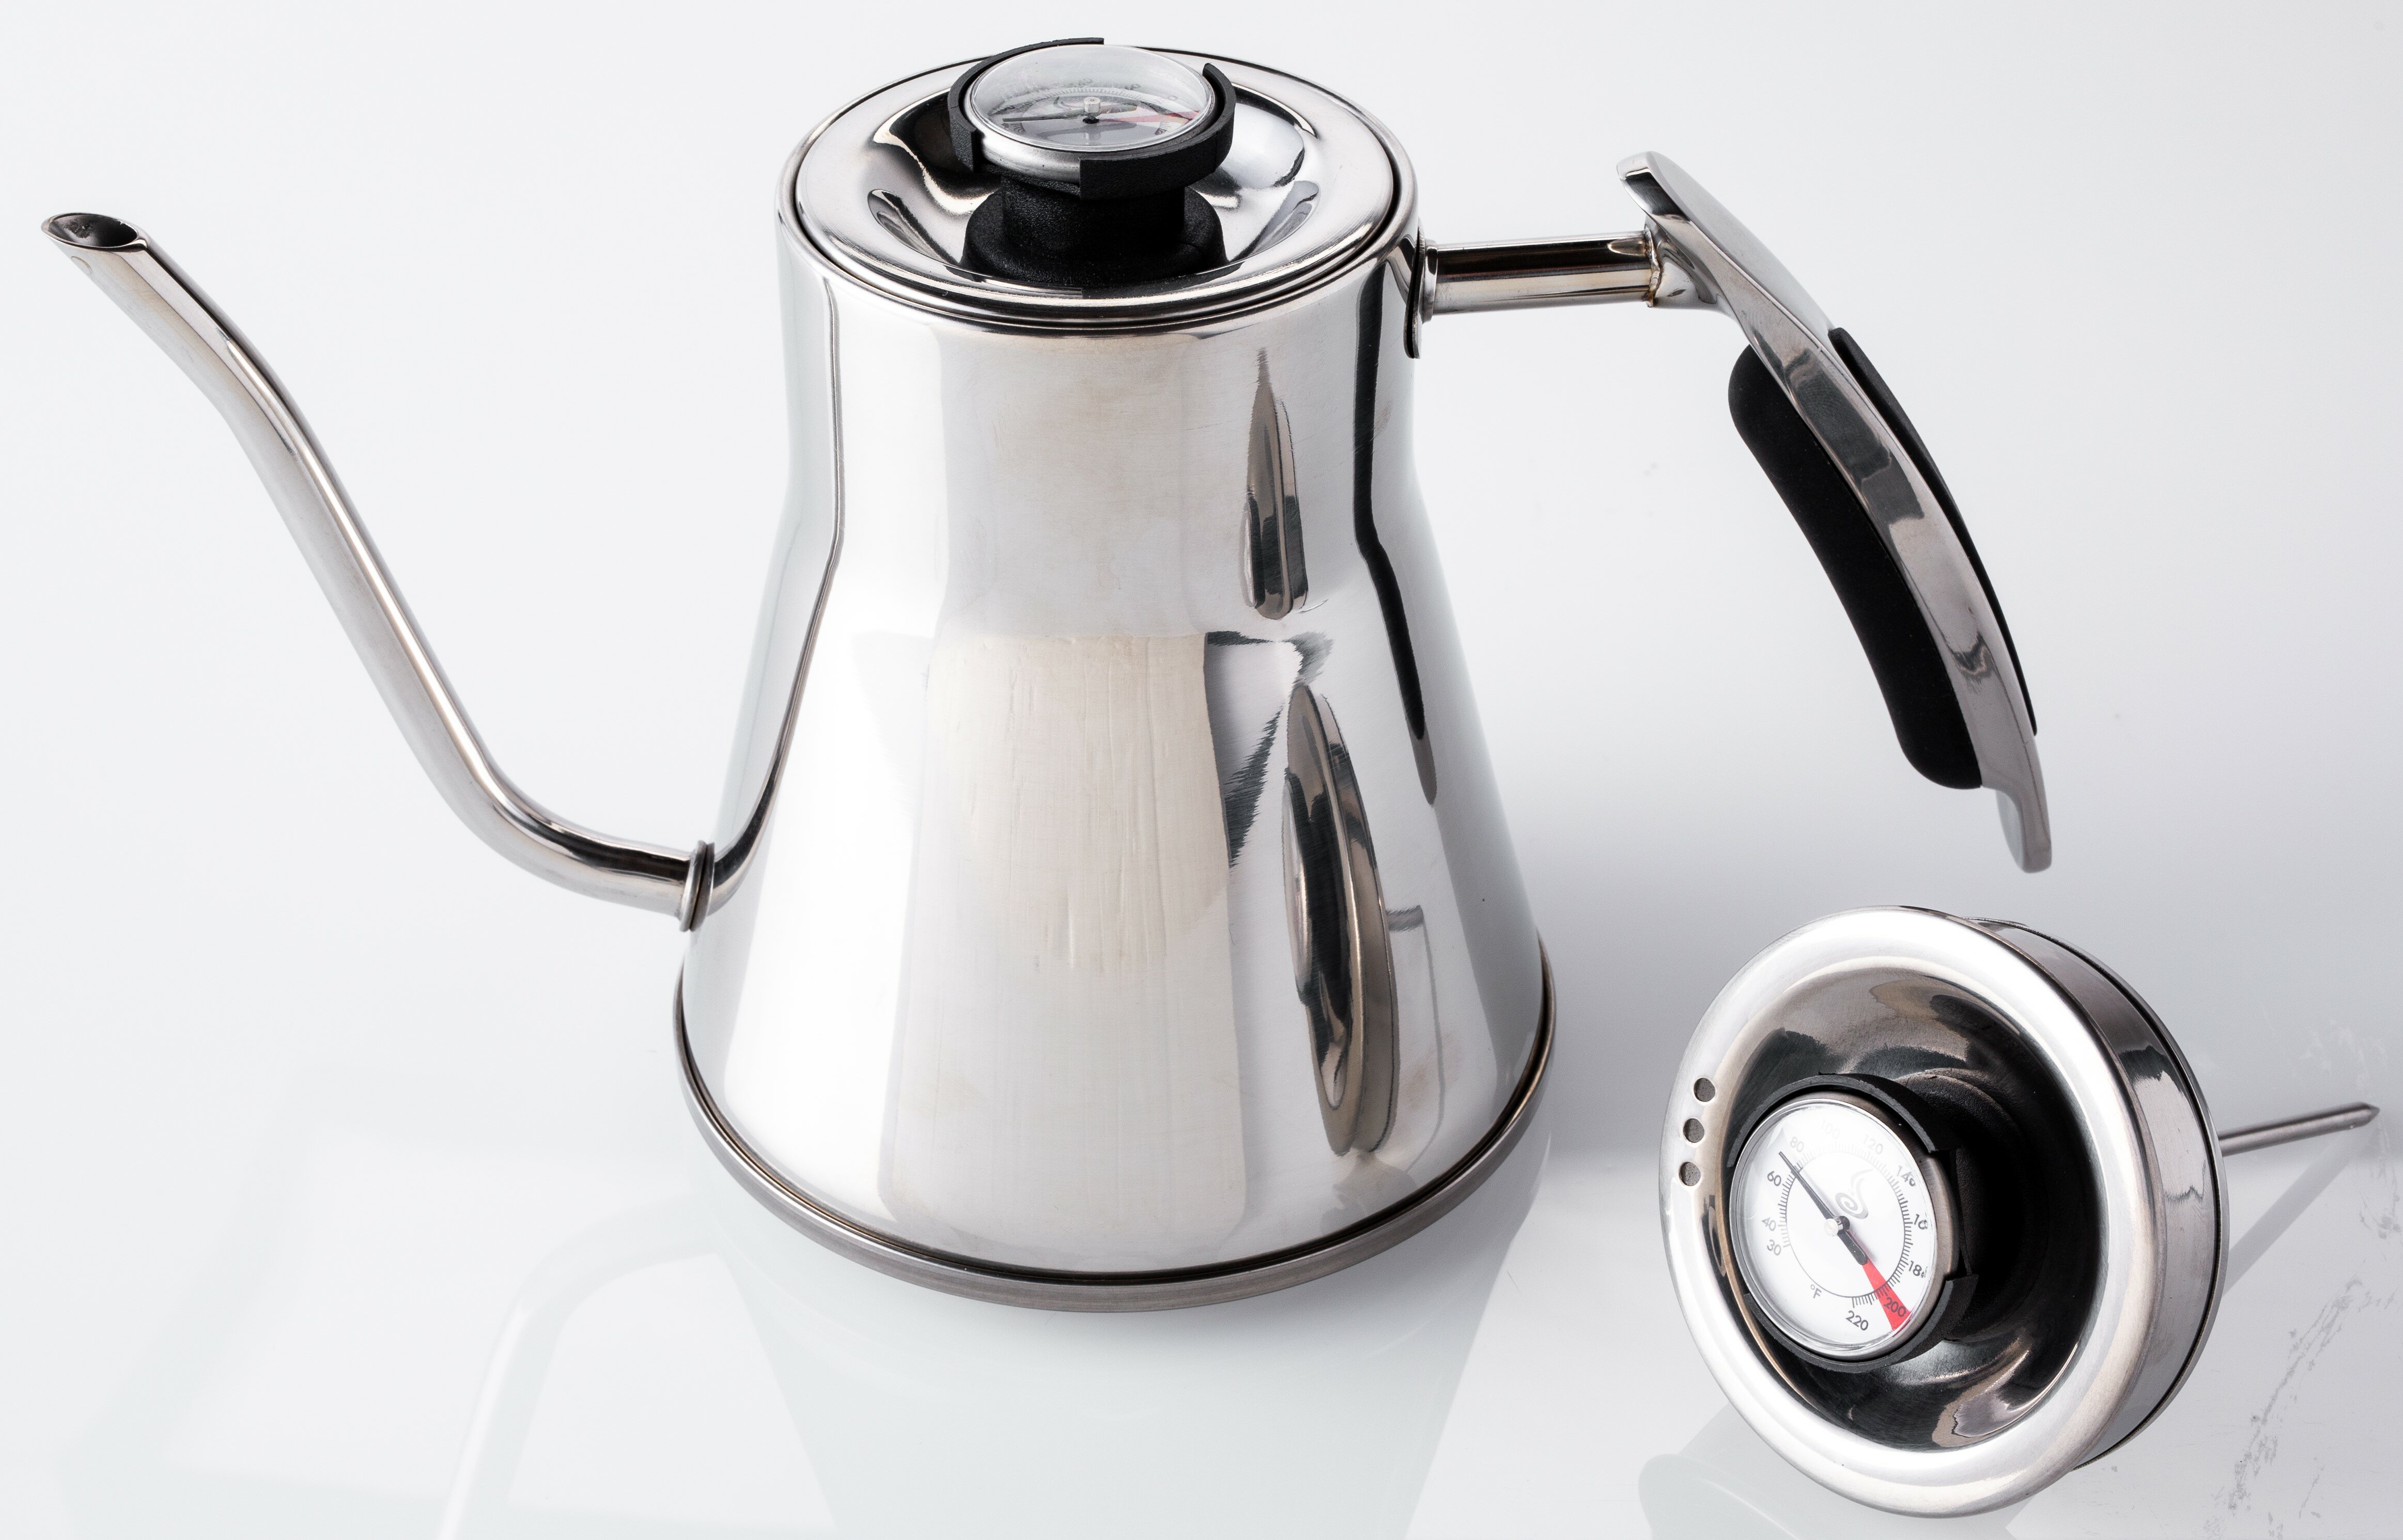 Java Concepts Stainless Steel Gooseneck Kettle & Reviews